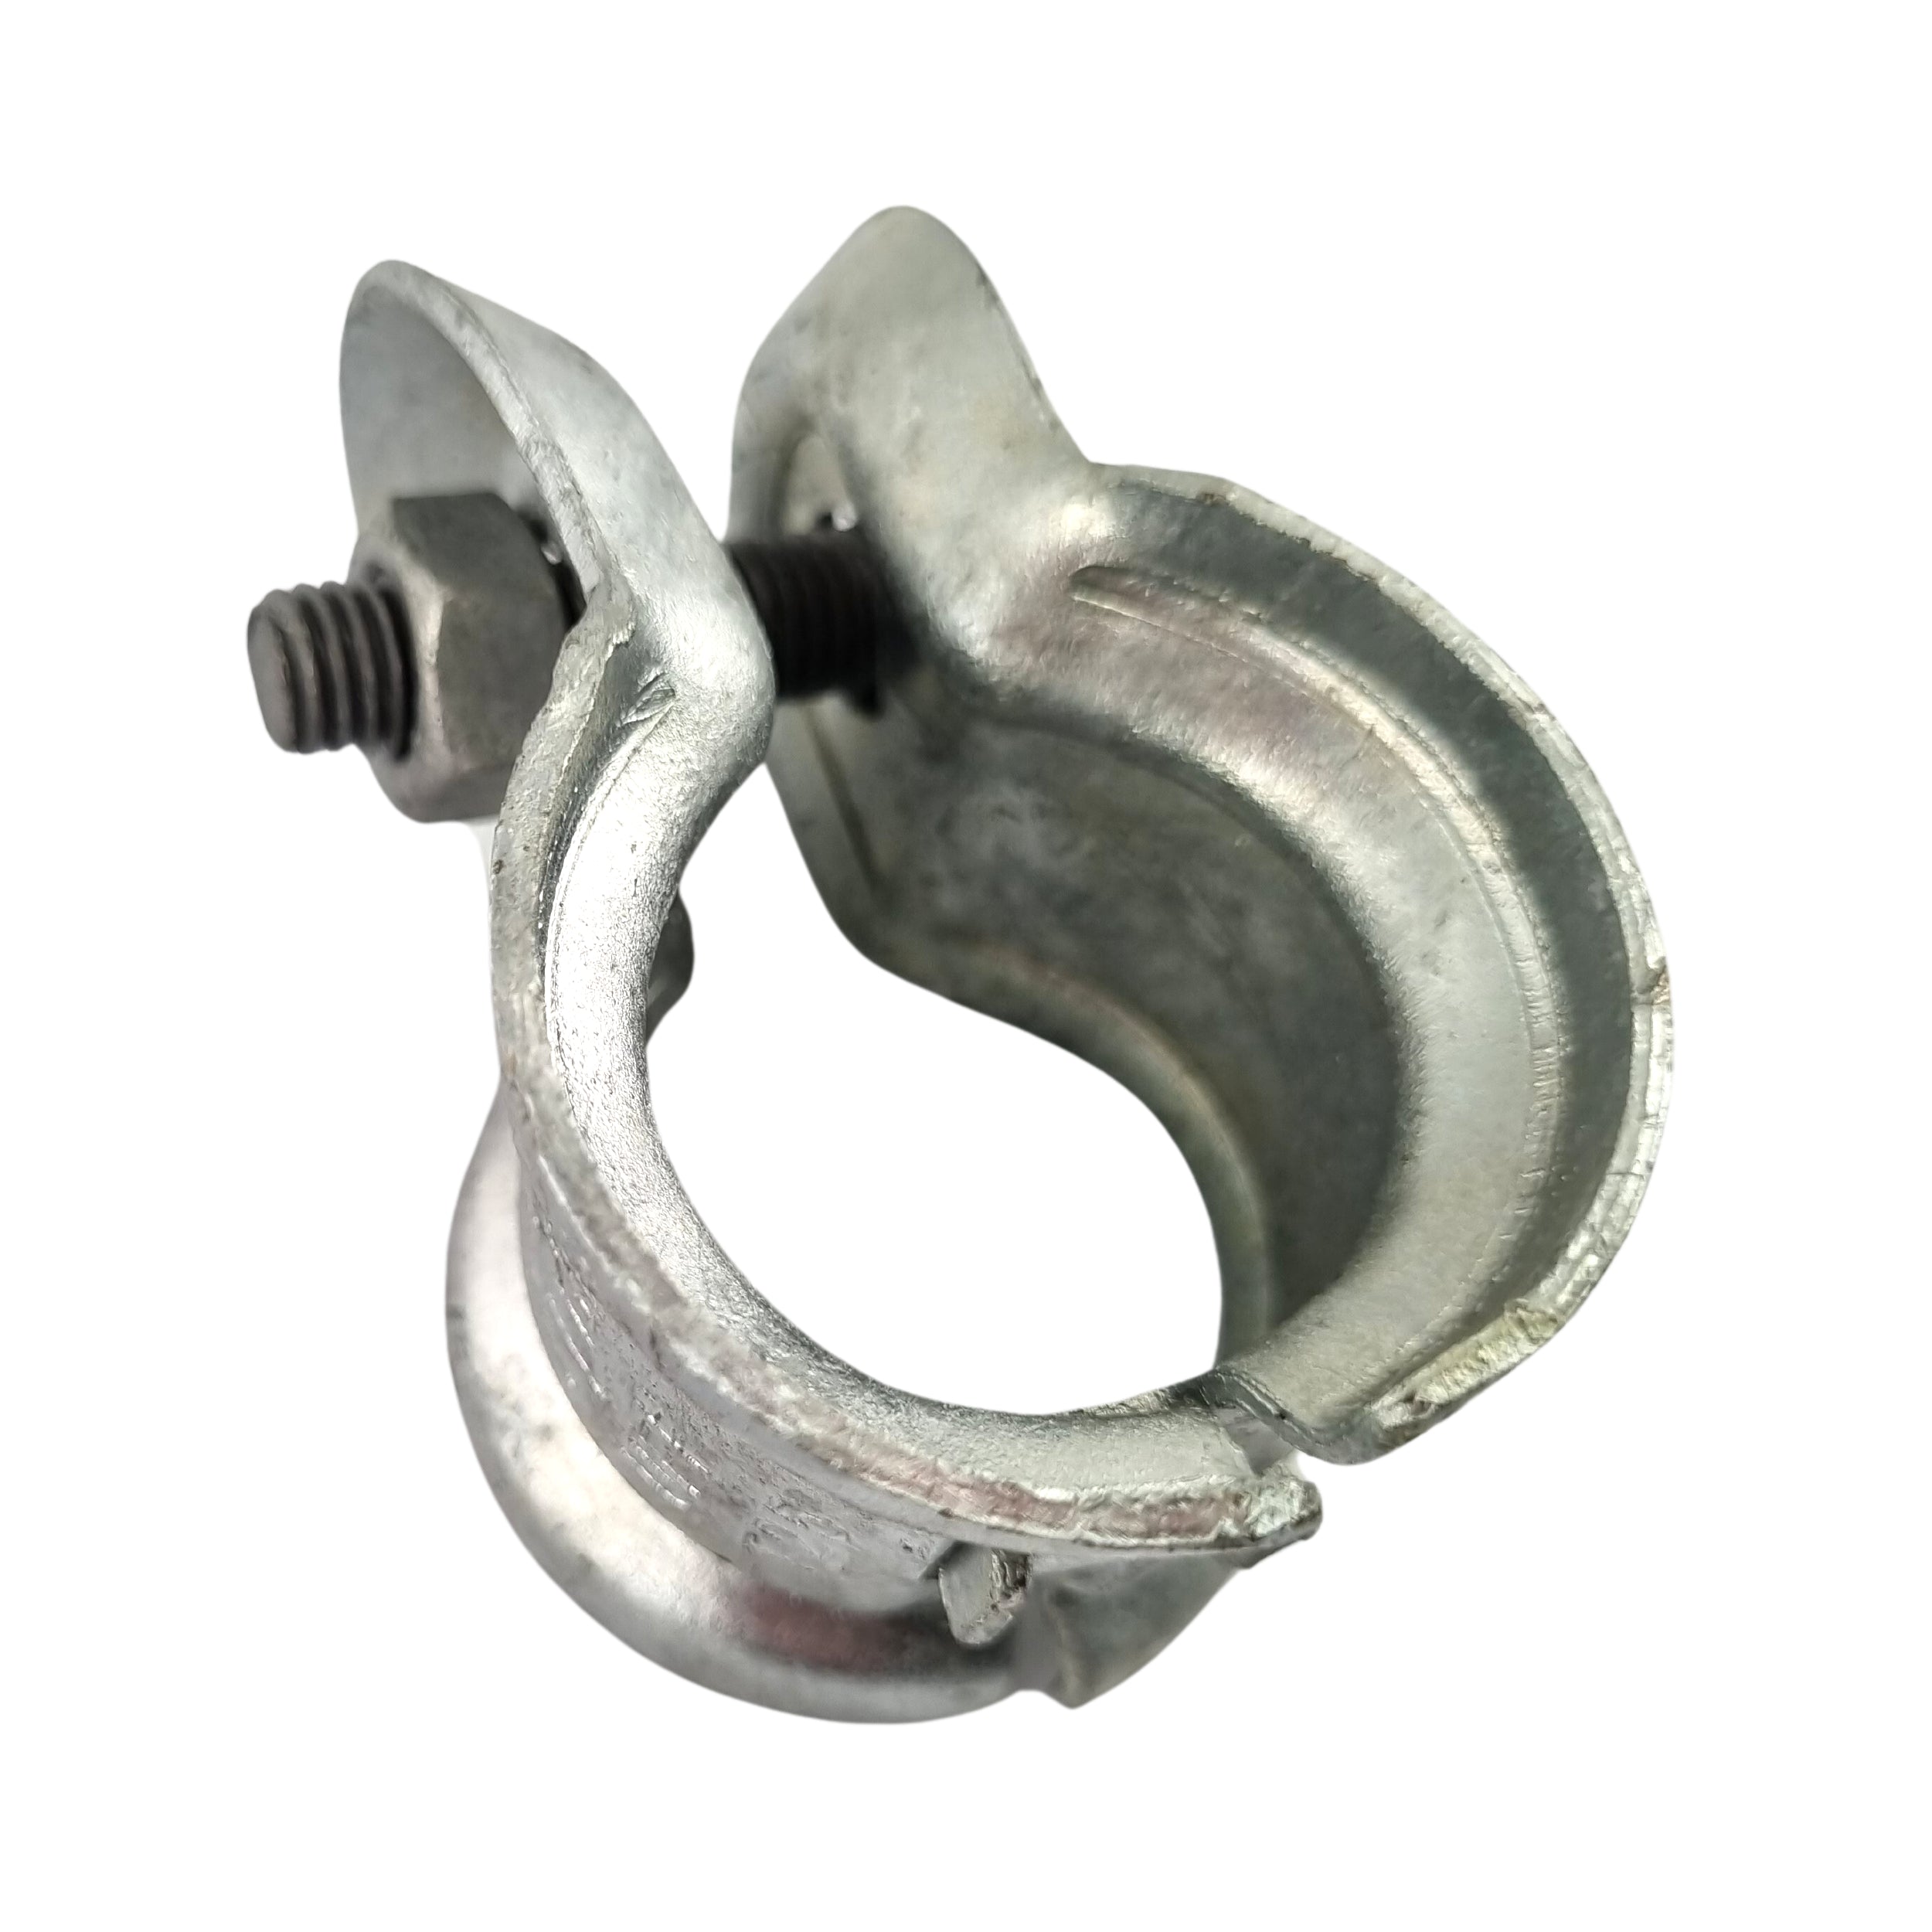 Universal Post Clamps in a galvanised finish, Australian made. Product code: UFFT. Various sizes. Shop Fence & Gate Fittings. Australia wide shipping. Chain.com.au